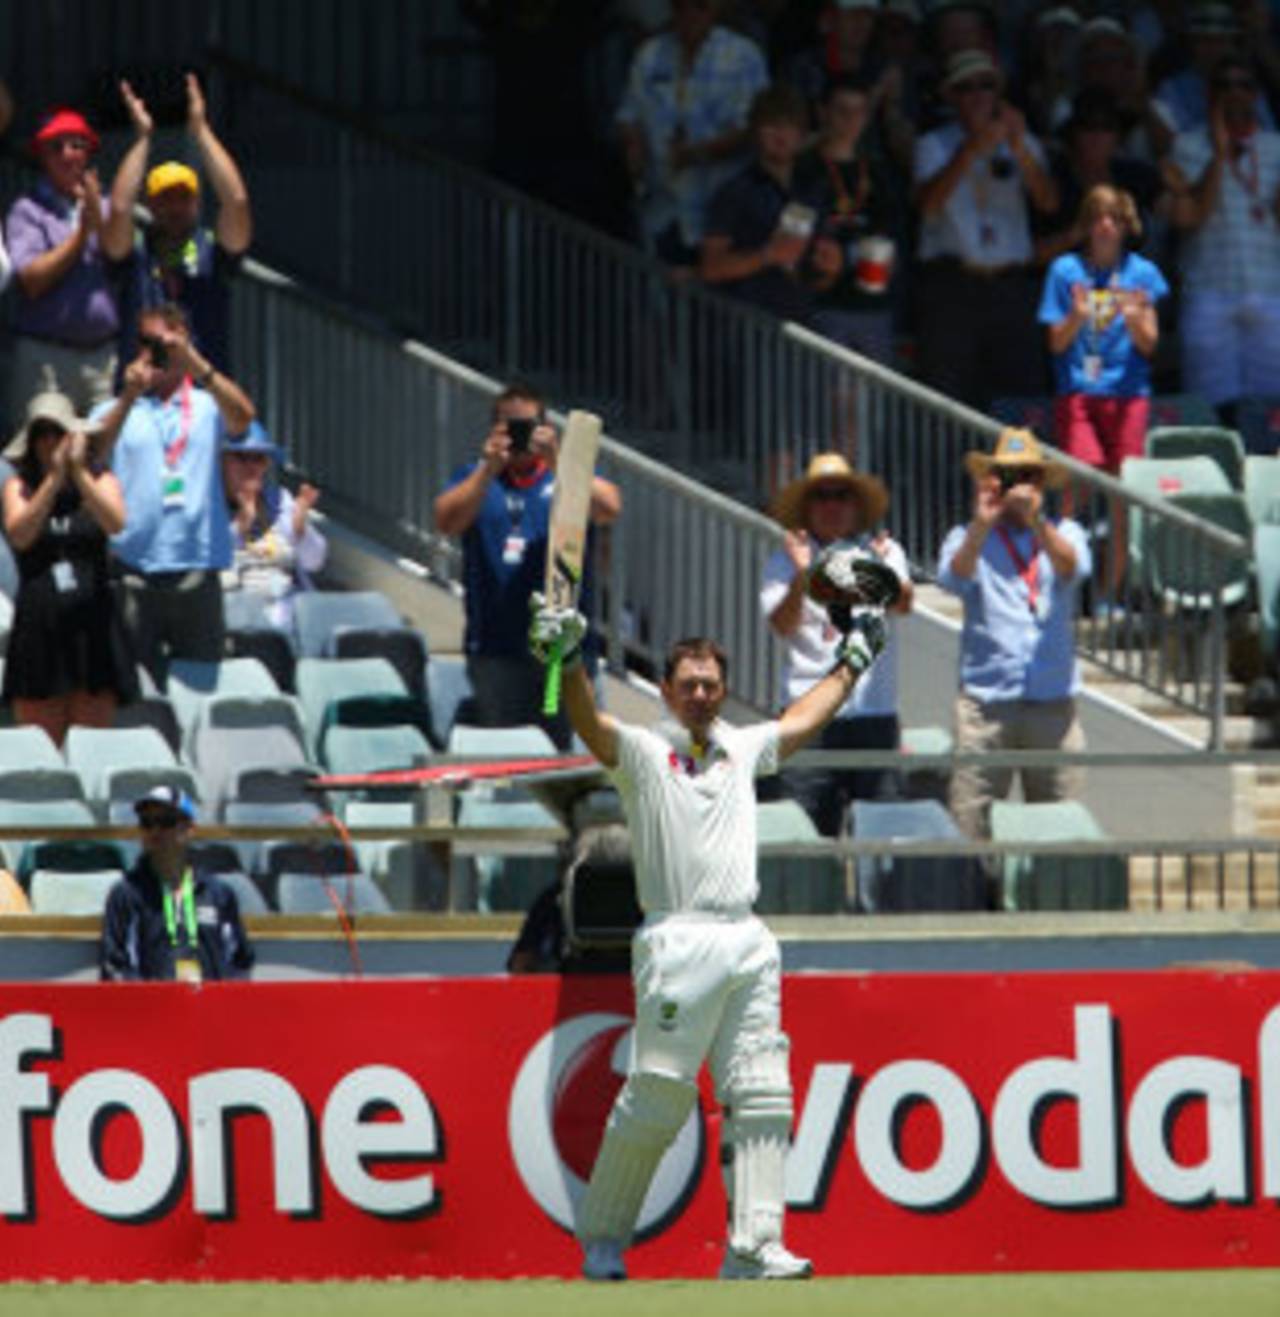 The moment that will stay with the fans watching Ricky Ponting's farewell innings&nbsp;&nbsp;&bull;&nbsp;&nbsp;Getty Images